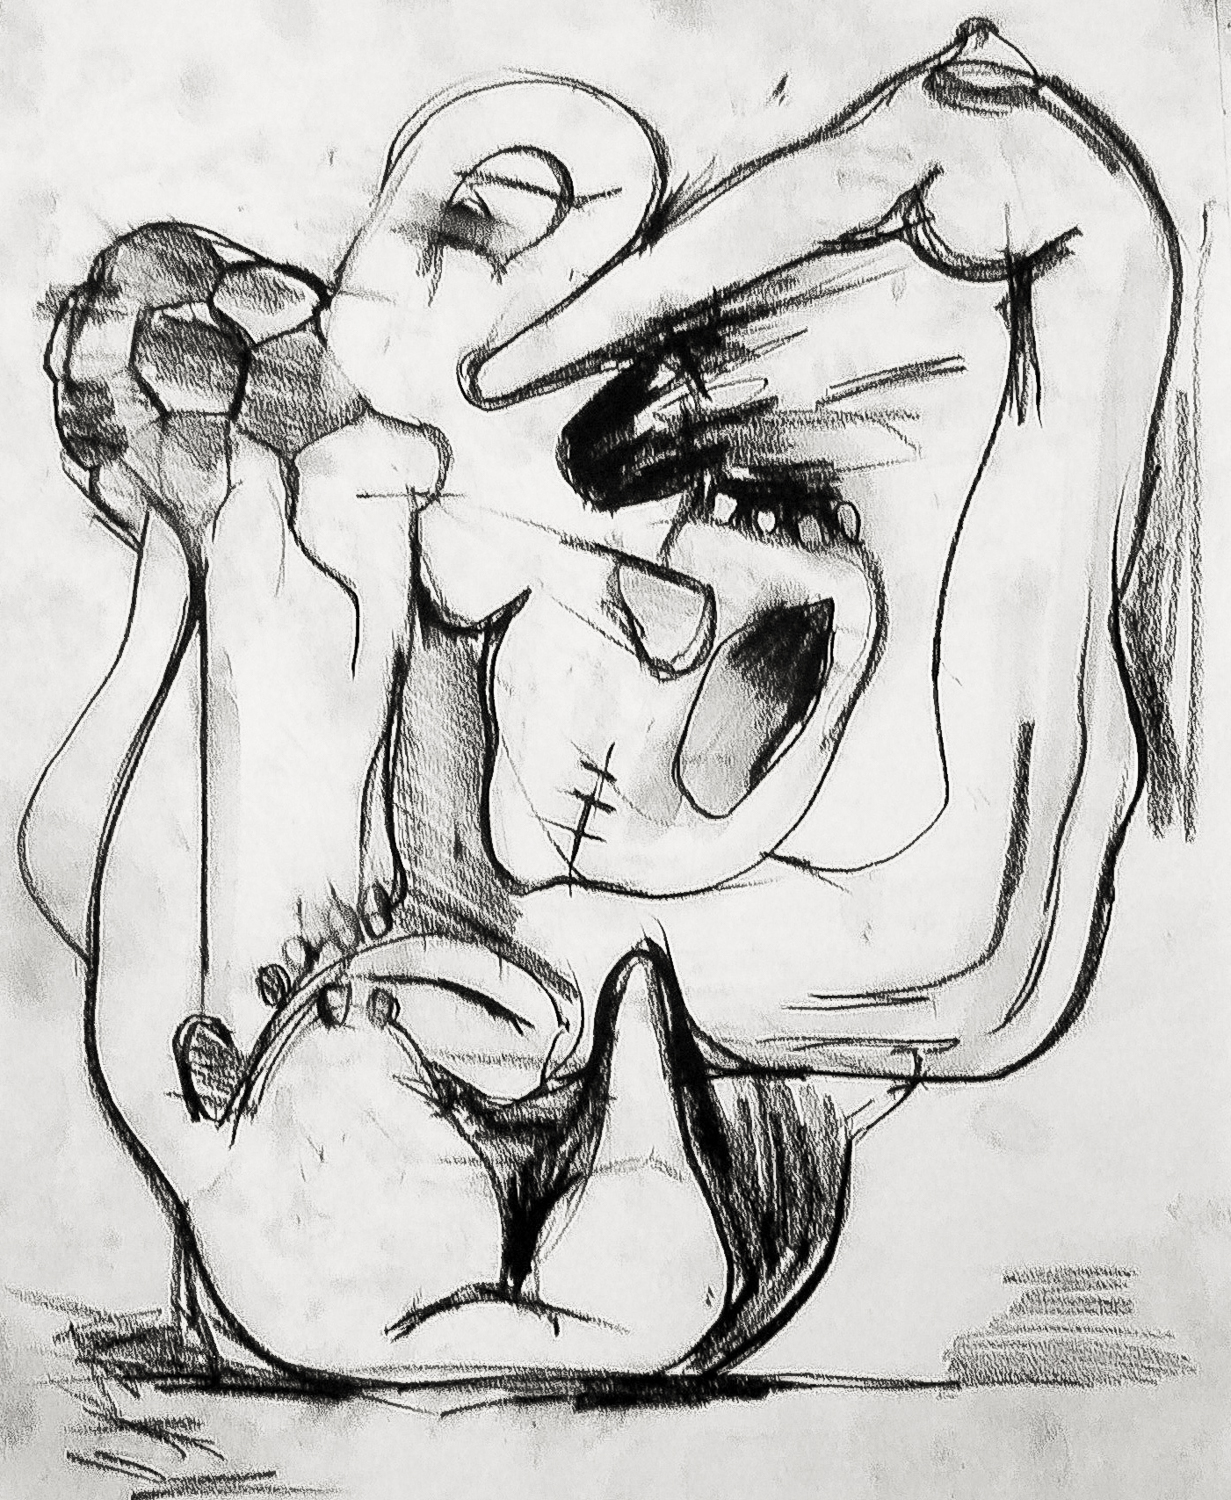    Untitled Drawing , 2002   Conte on paper   12 x 14"  